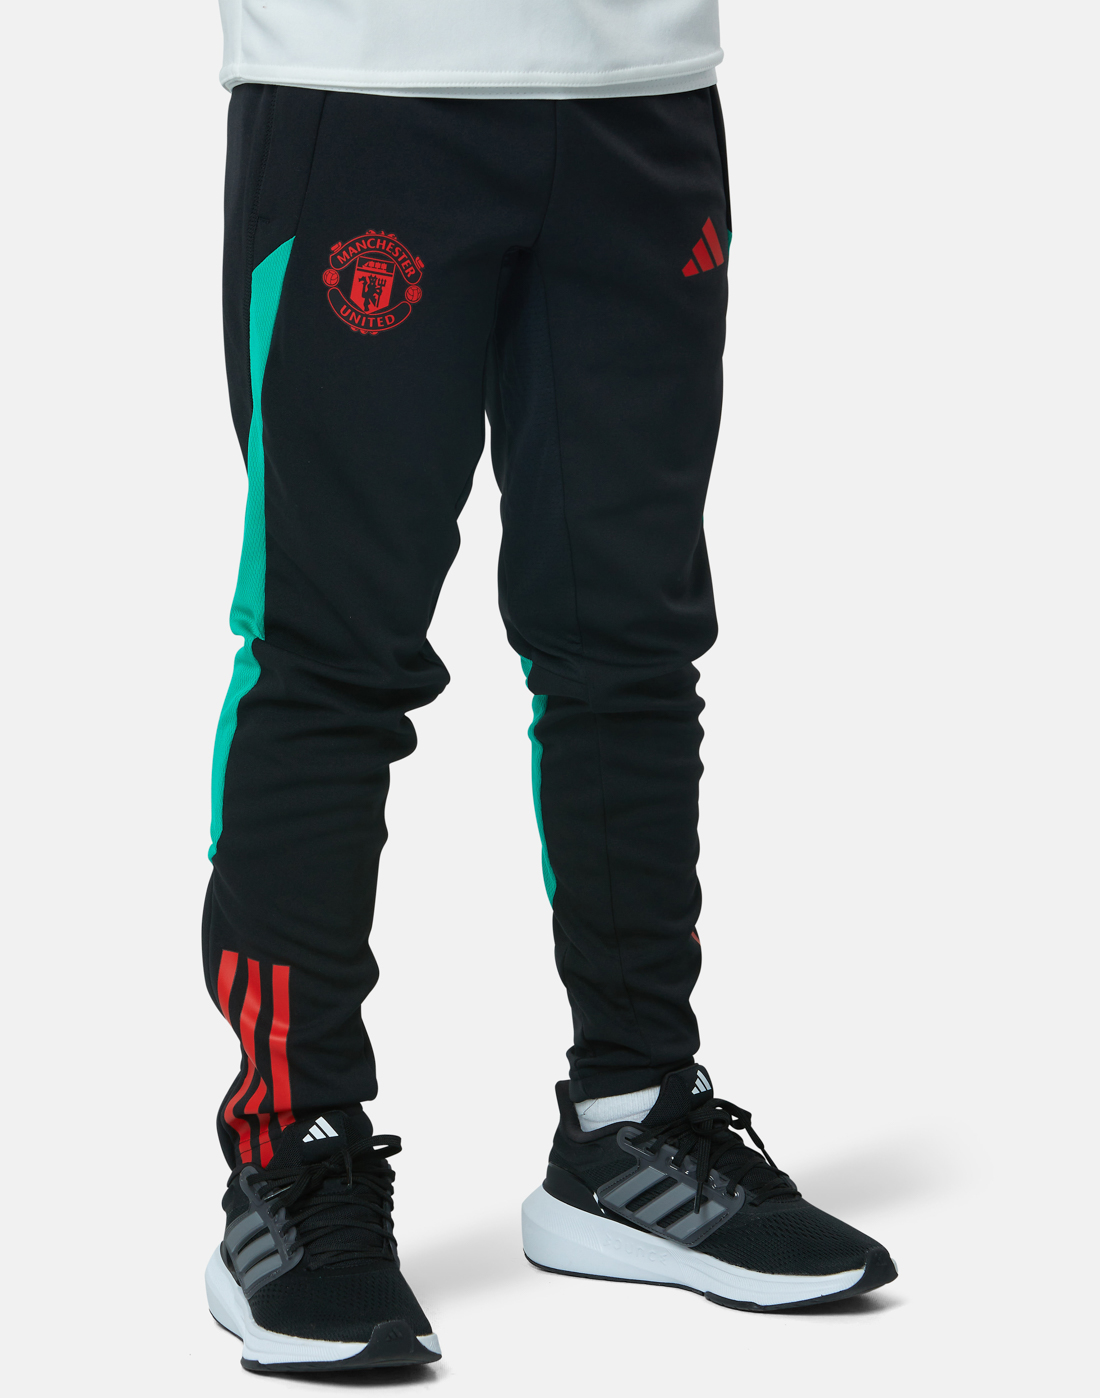 Adidas Cold.rdy Workout Pant - Fitness Pants | Nencini Sport